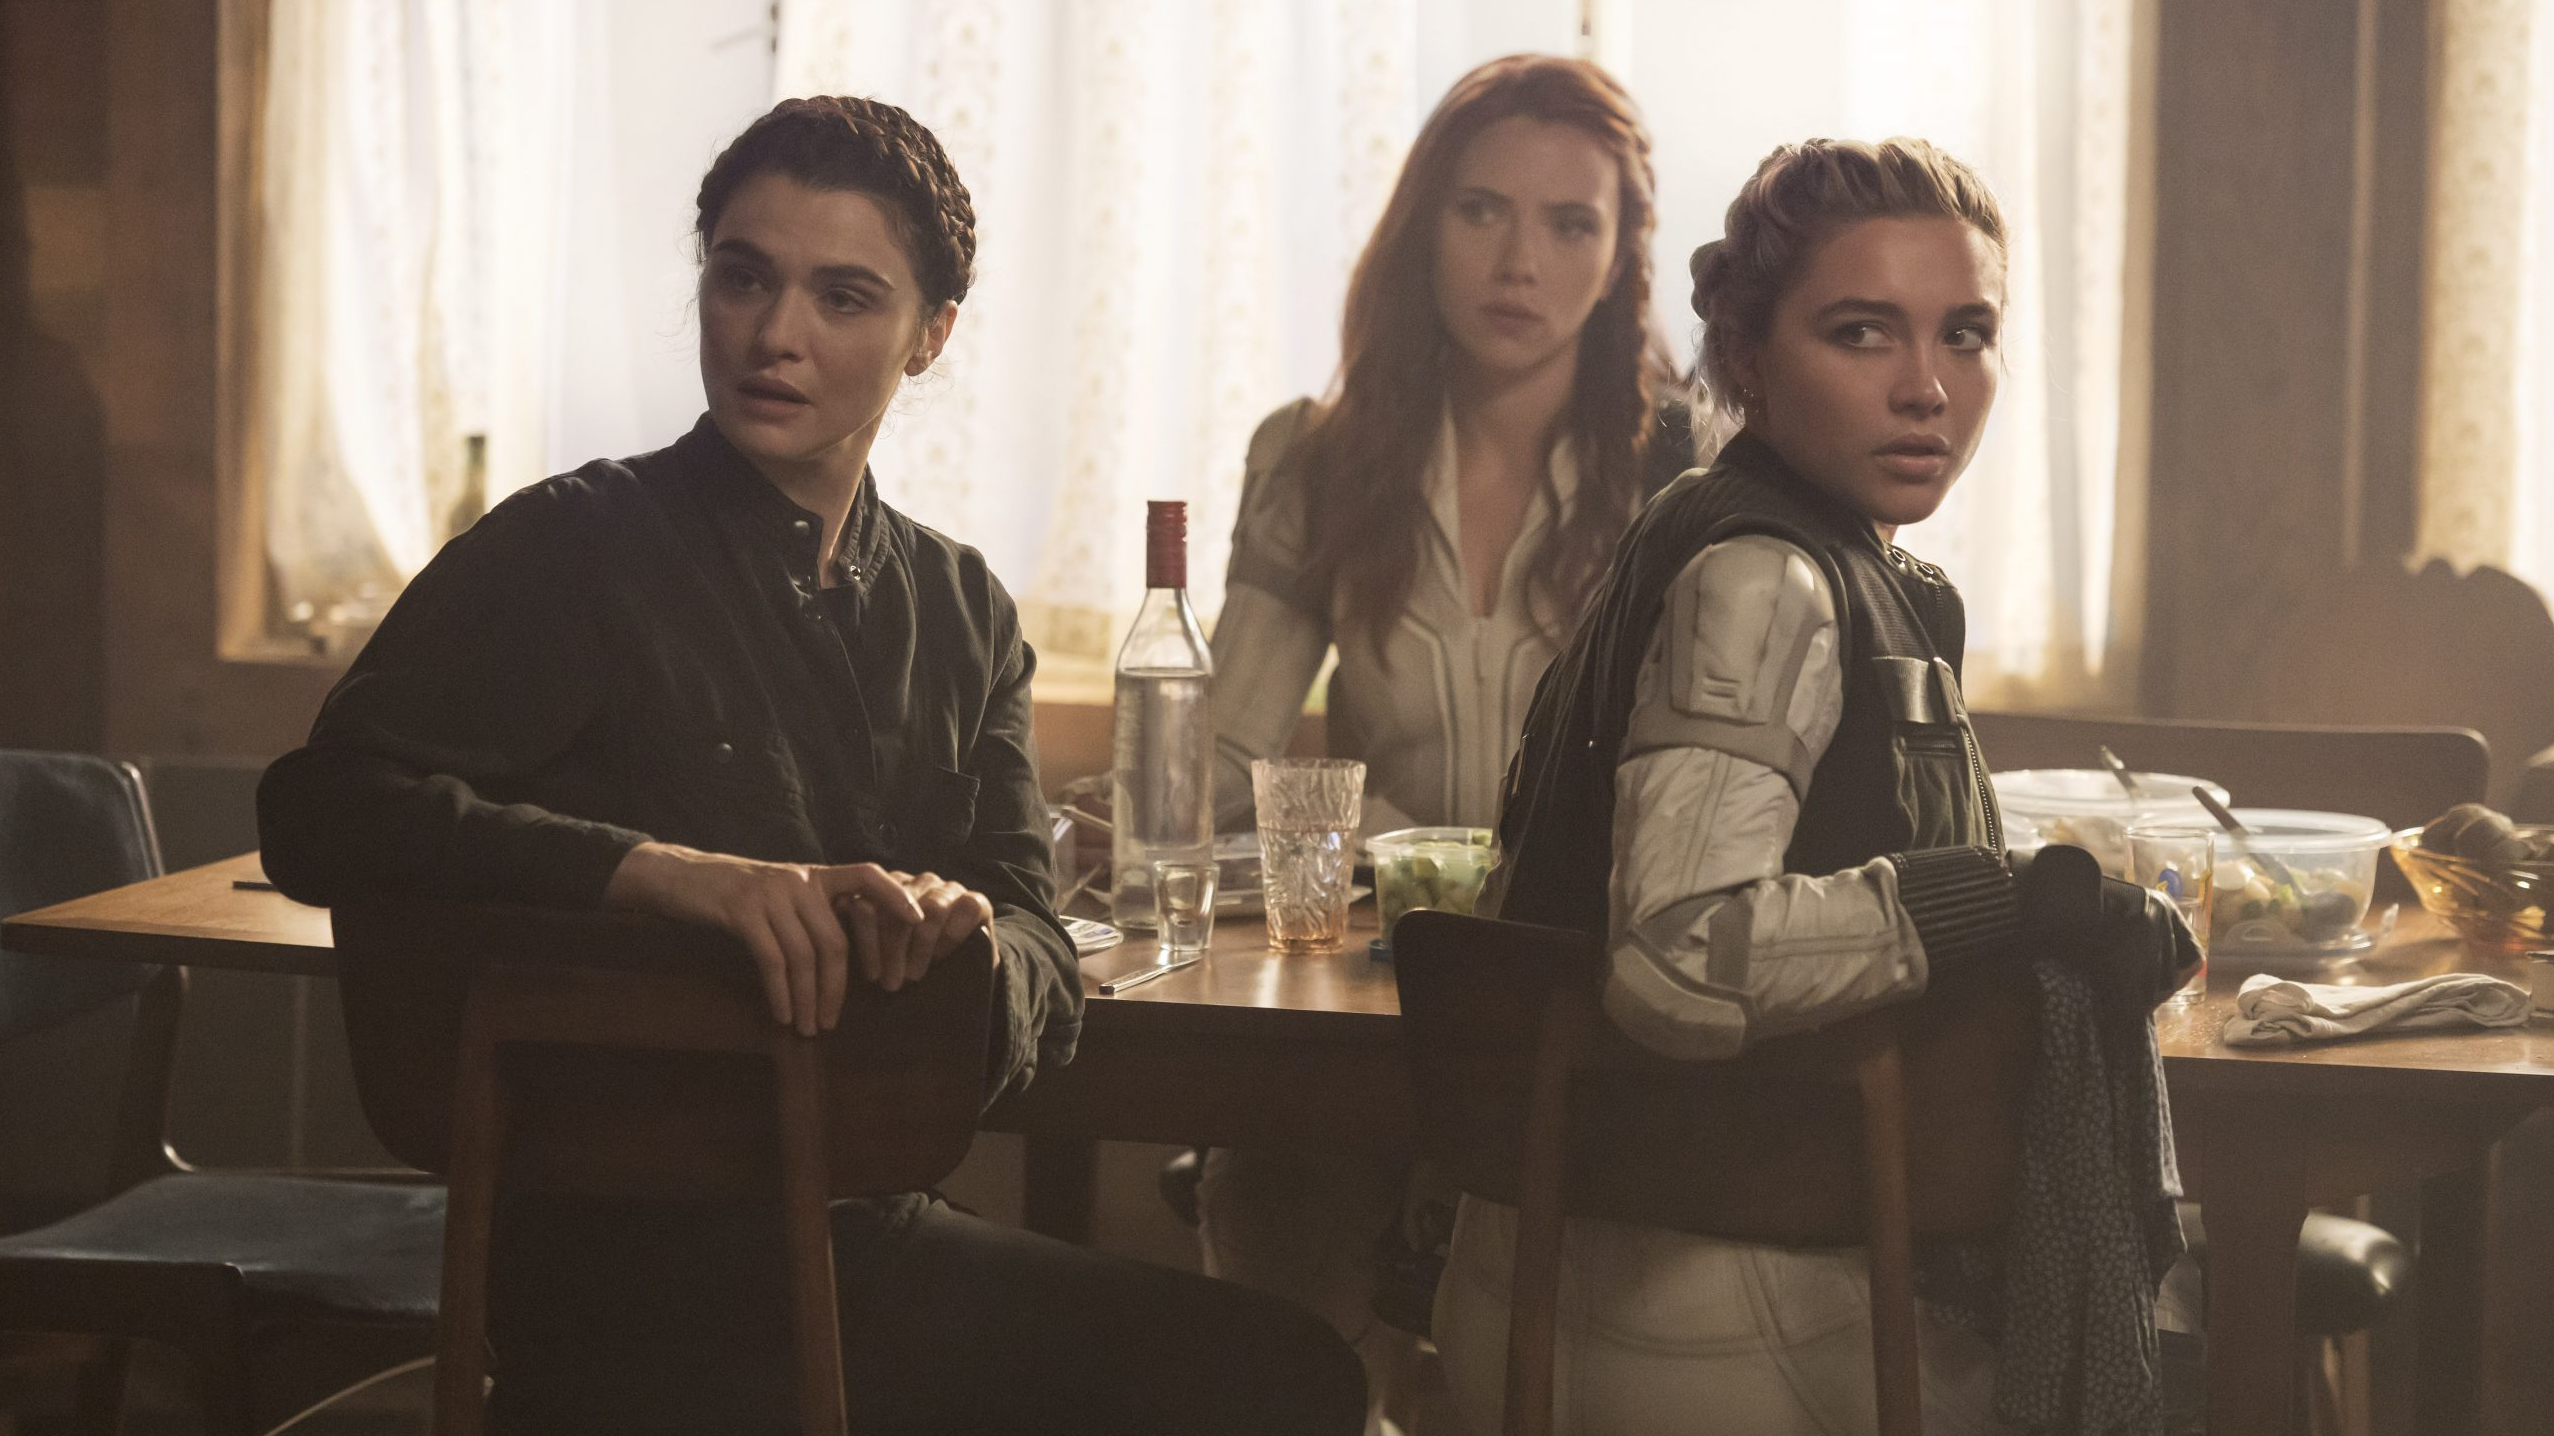 Rachel Weisz, Scarlett Johansson, & Florence Pugh sit at a dinner table while wearing spy costumes as seen in BLACK WIDOW, the latest MCU film to hit theaters.